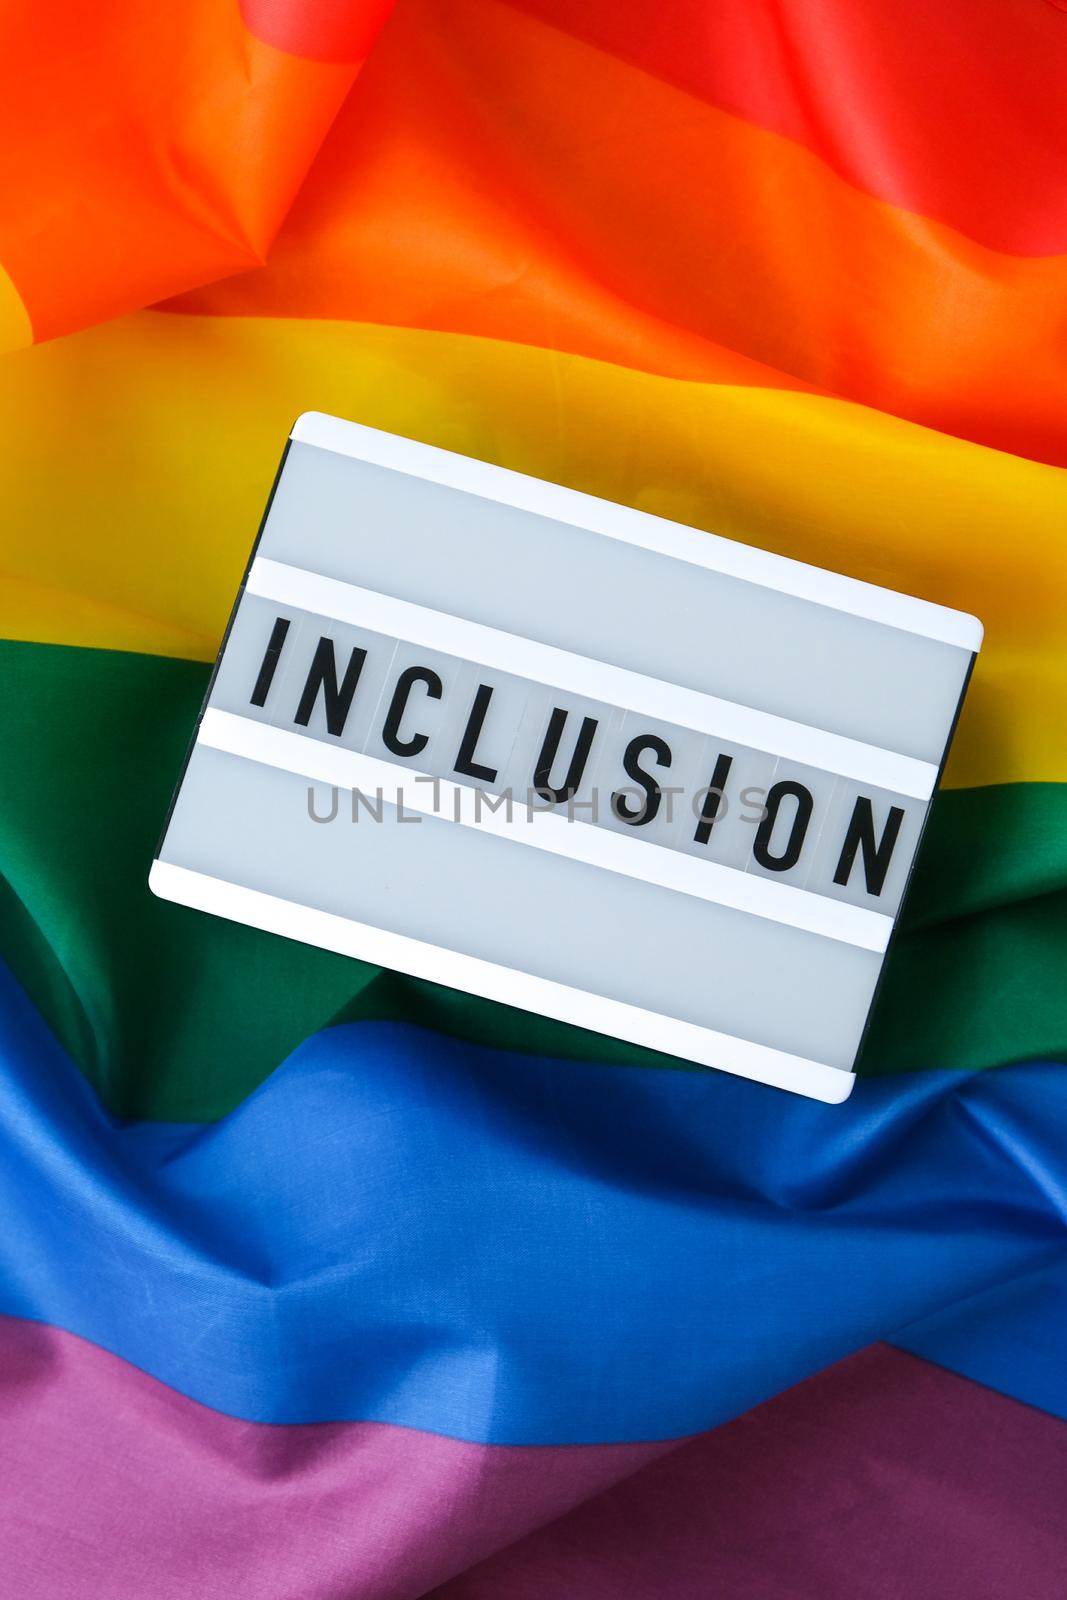 Rainbow flag with lightbox and text INCLUSION. Rainbow lgbtq flag made from silk material. Symbol of LGBTQ pride month. Equal rights. Peace and freedom. Support LGBTQ community